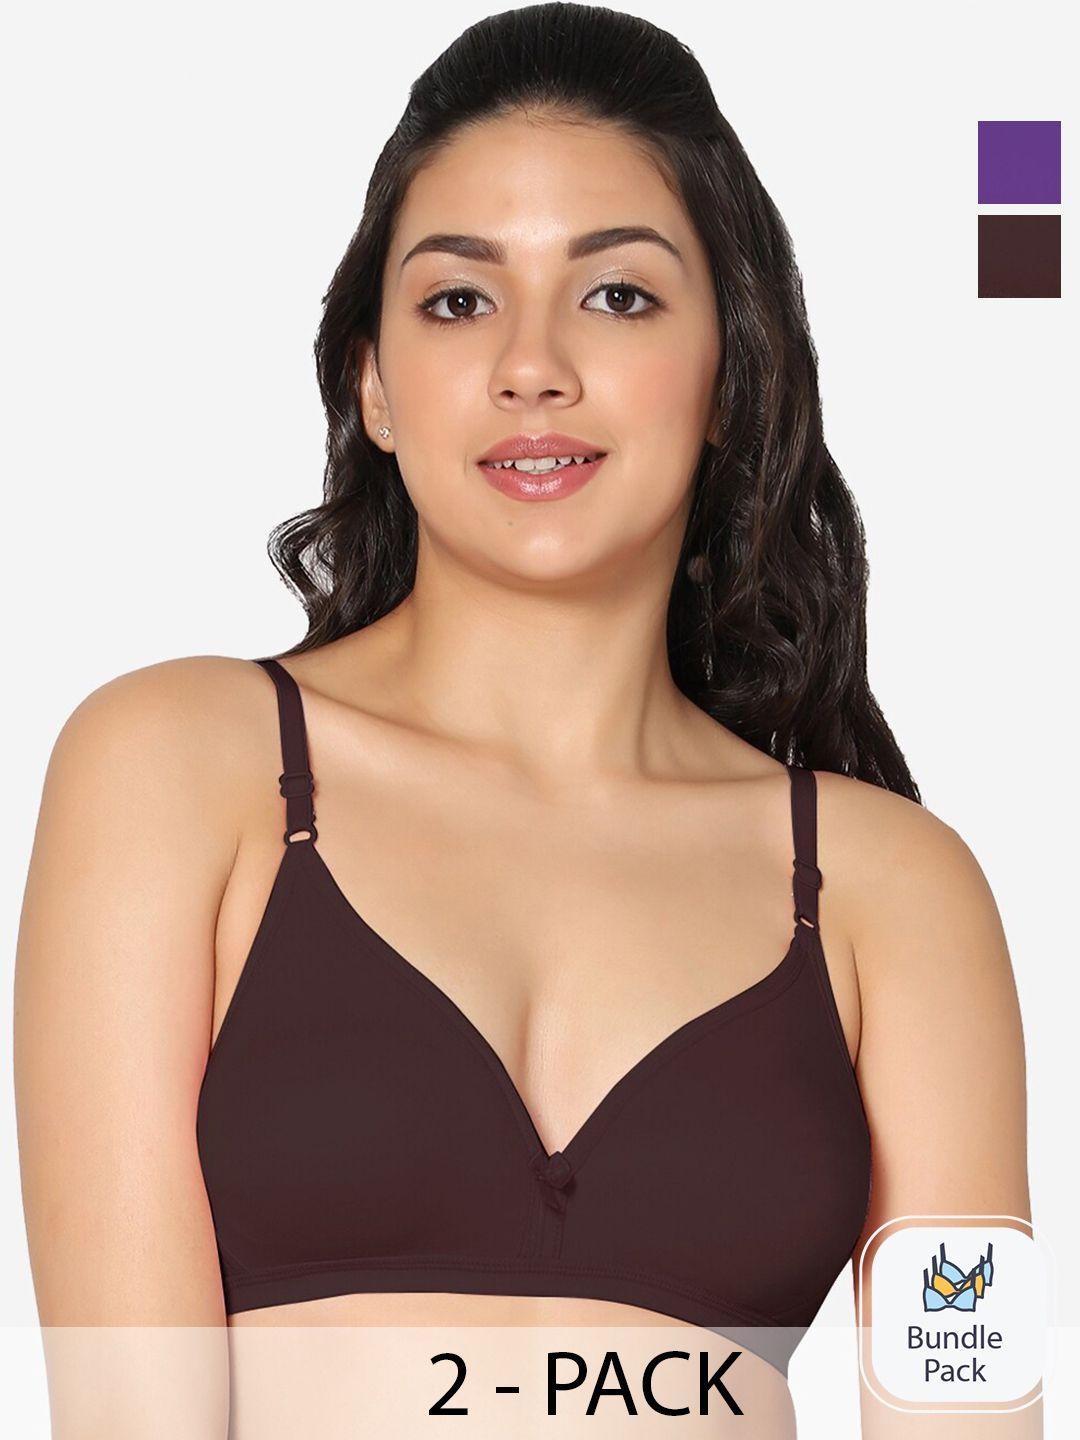 in care pack of 2 half coverage pure cotton t-shirt bra with all day comfort